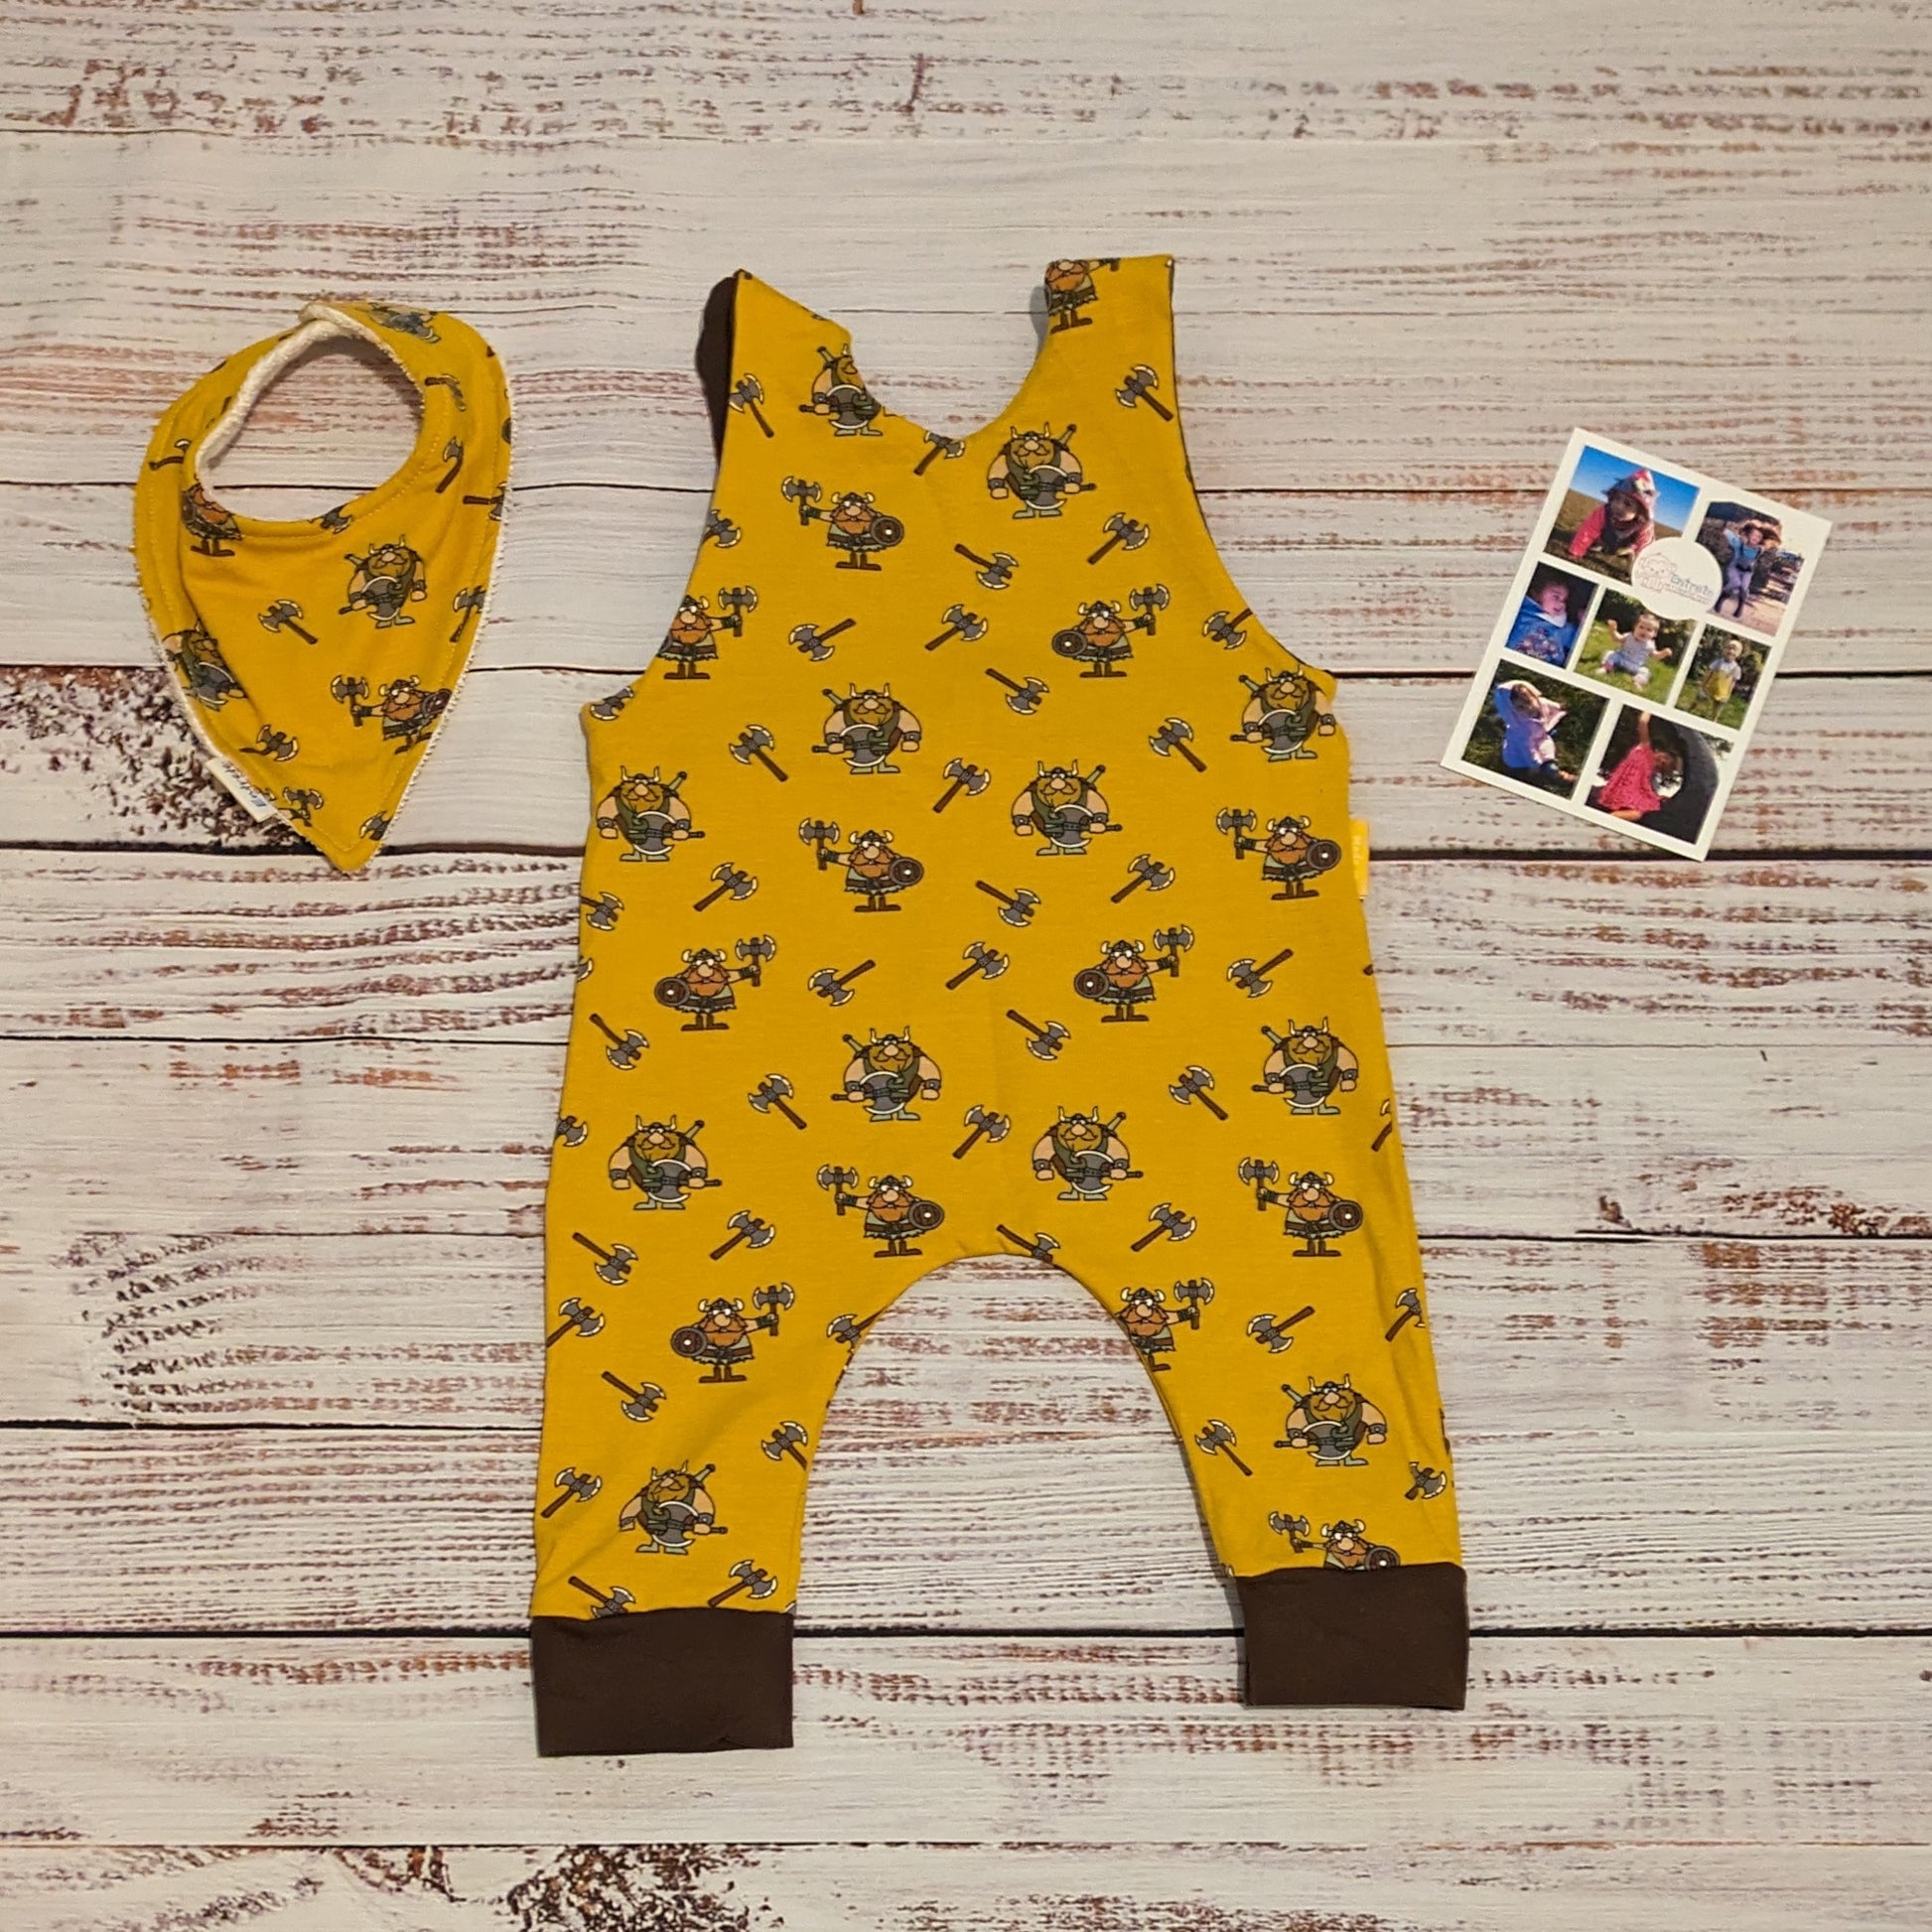 The soft, comfy and fun mustard Vikings sleeveless romper. Shown from the back with a matching bamboo bib. Lovingly handmade using mustard Vikings and chocolate cotton jersey's.